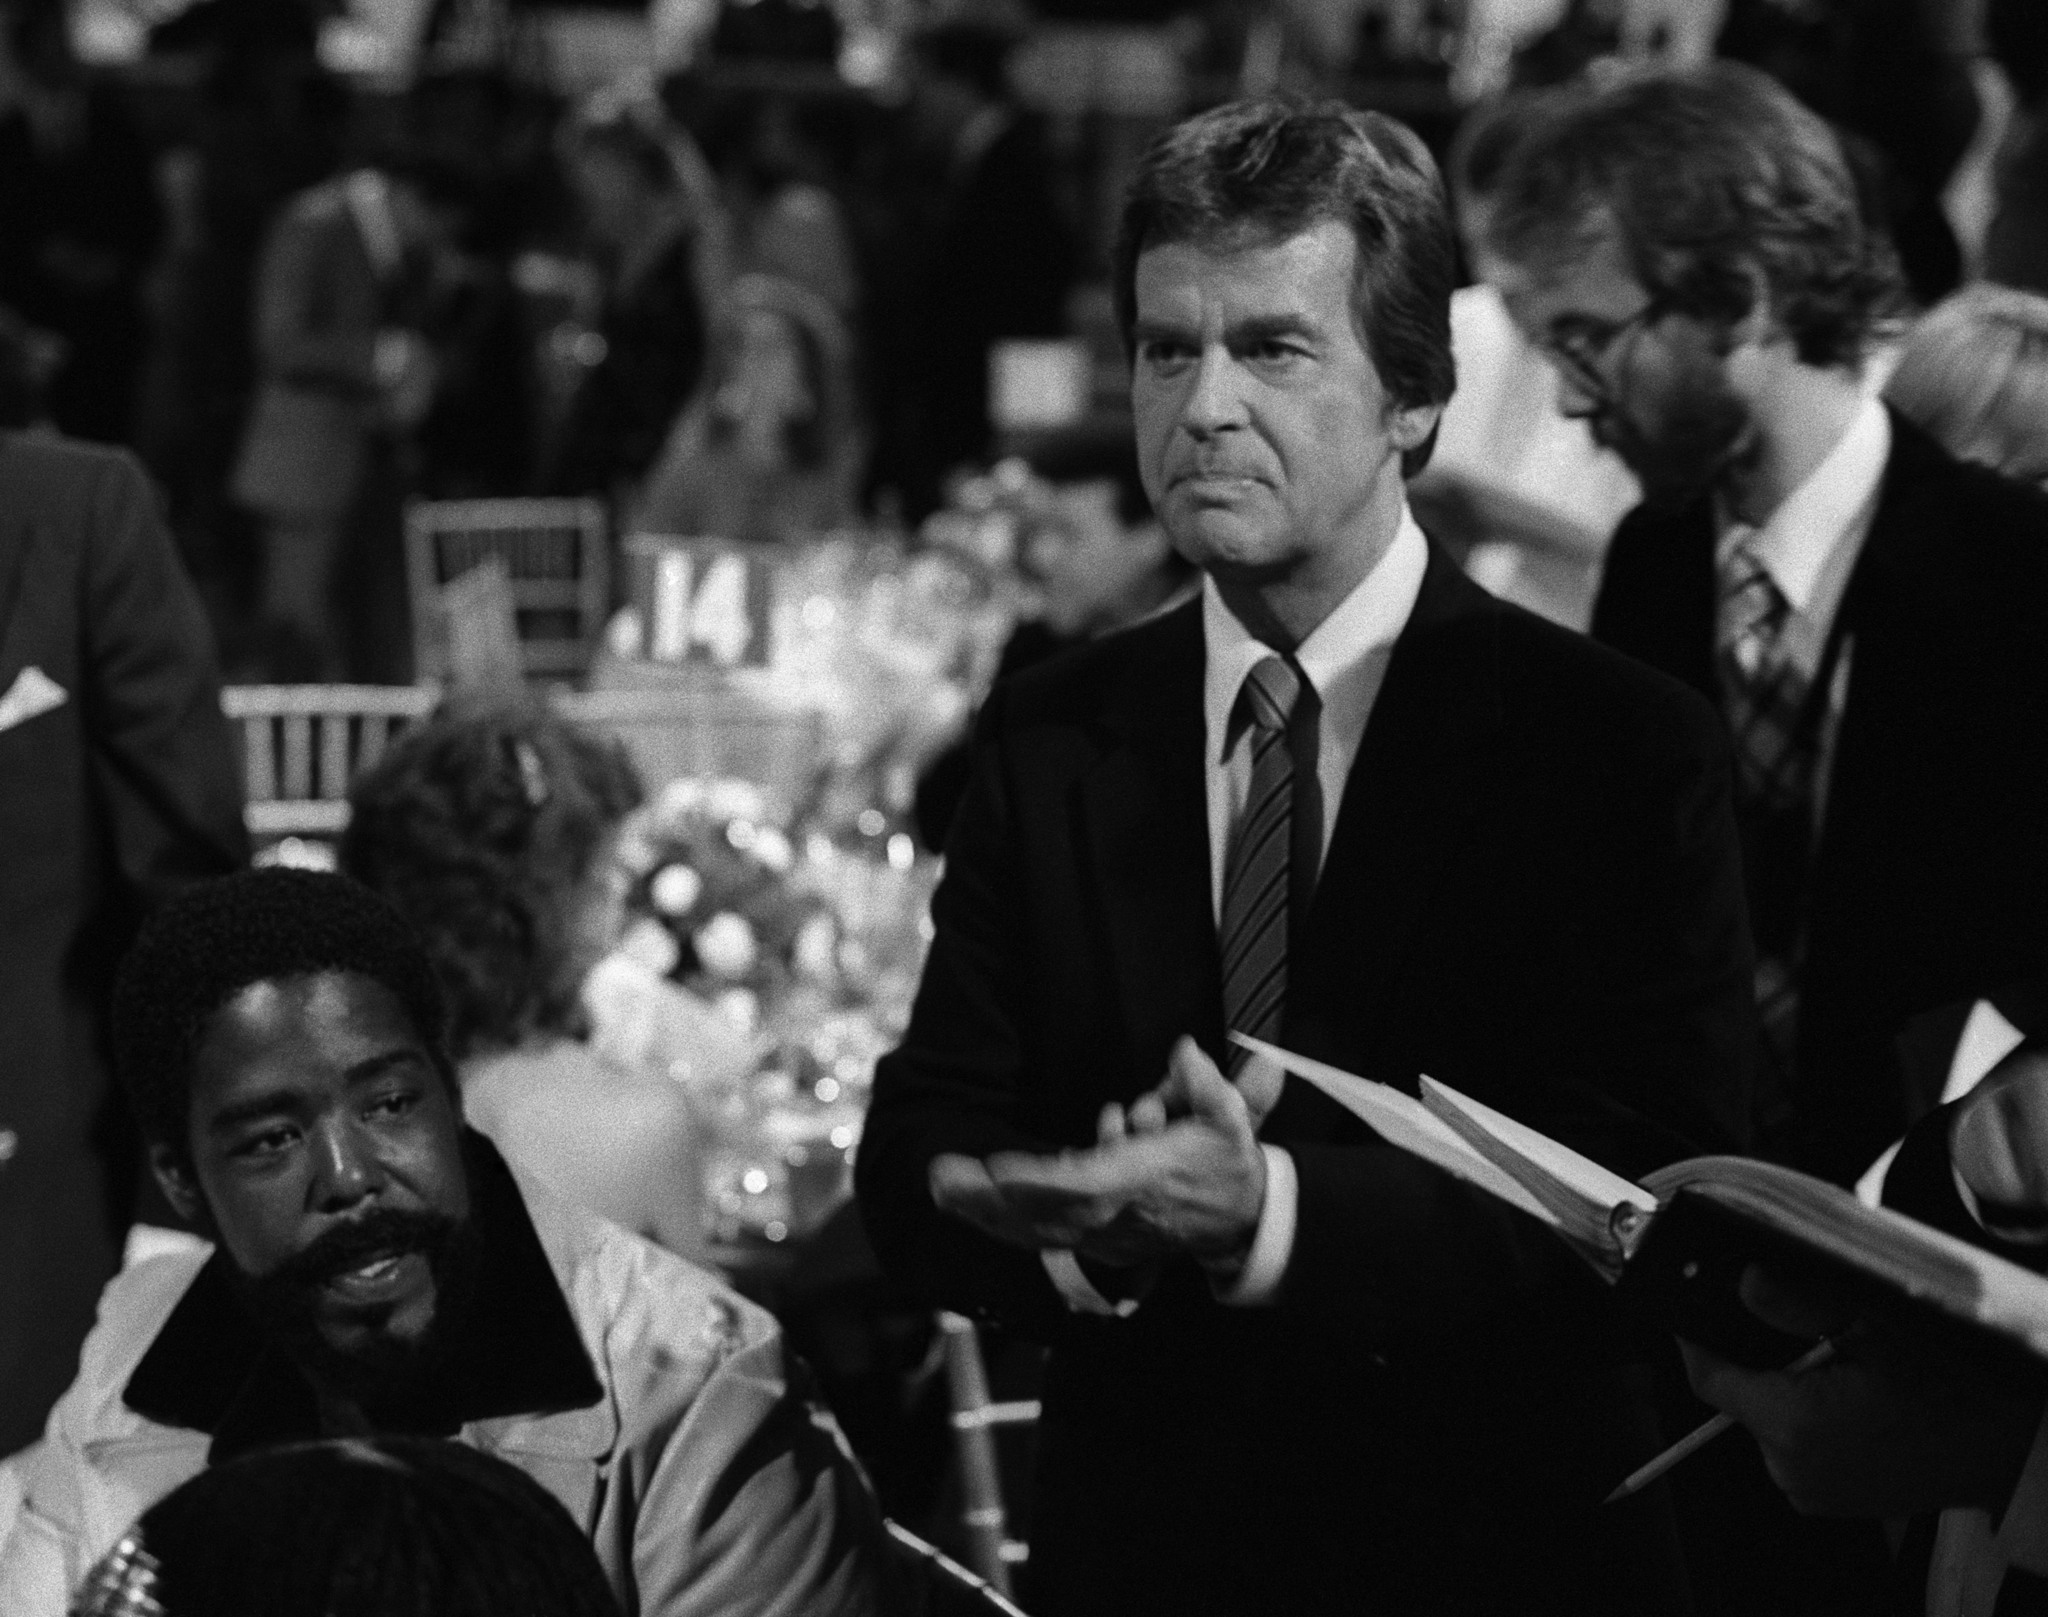 Dick Clark and Barry White